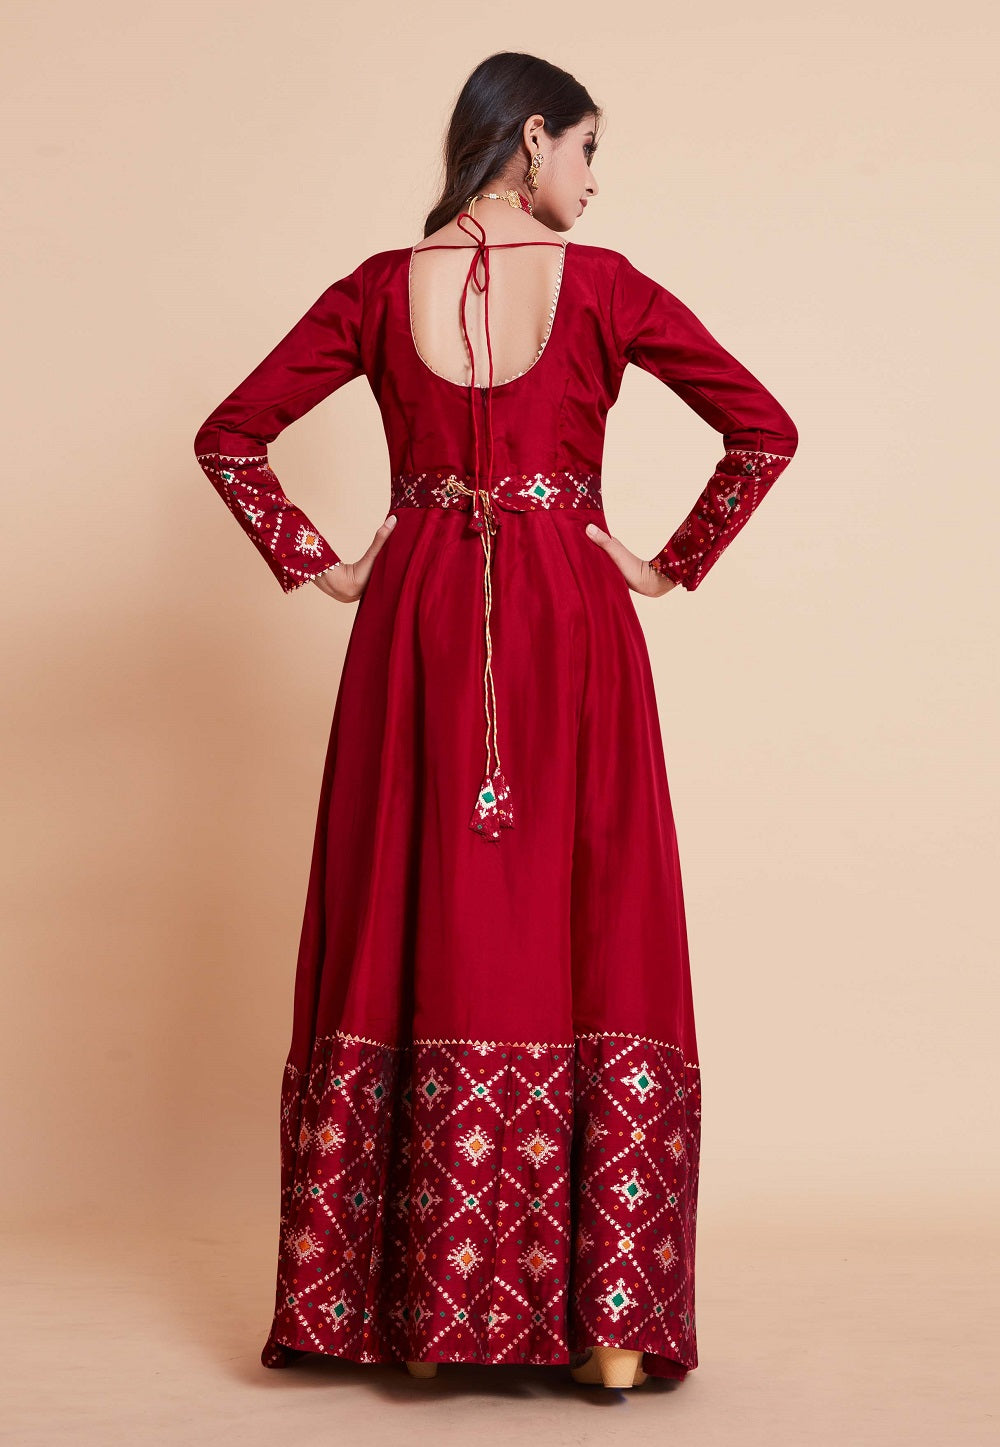 Art Silk Patola Printed Abaya Style Suit in Red